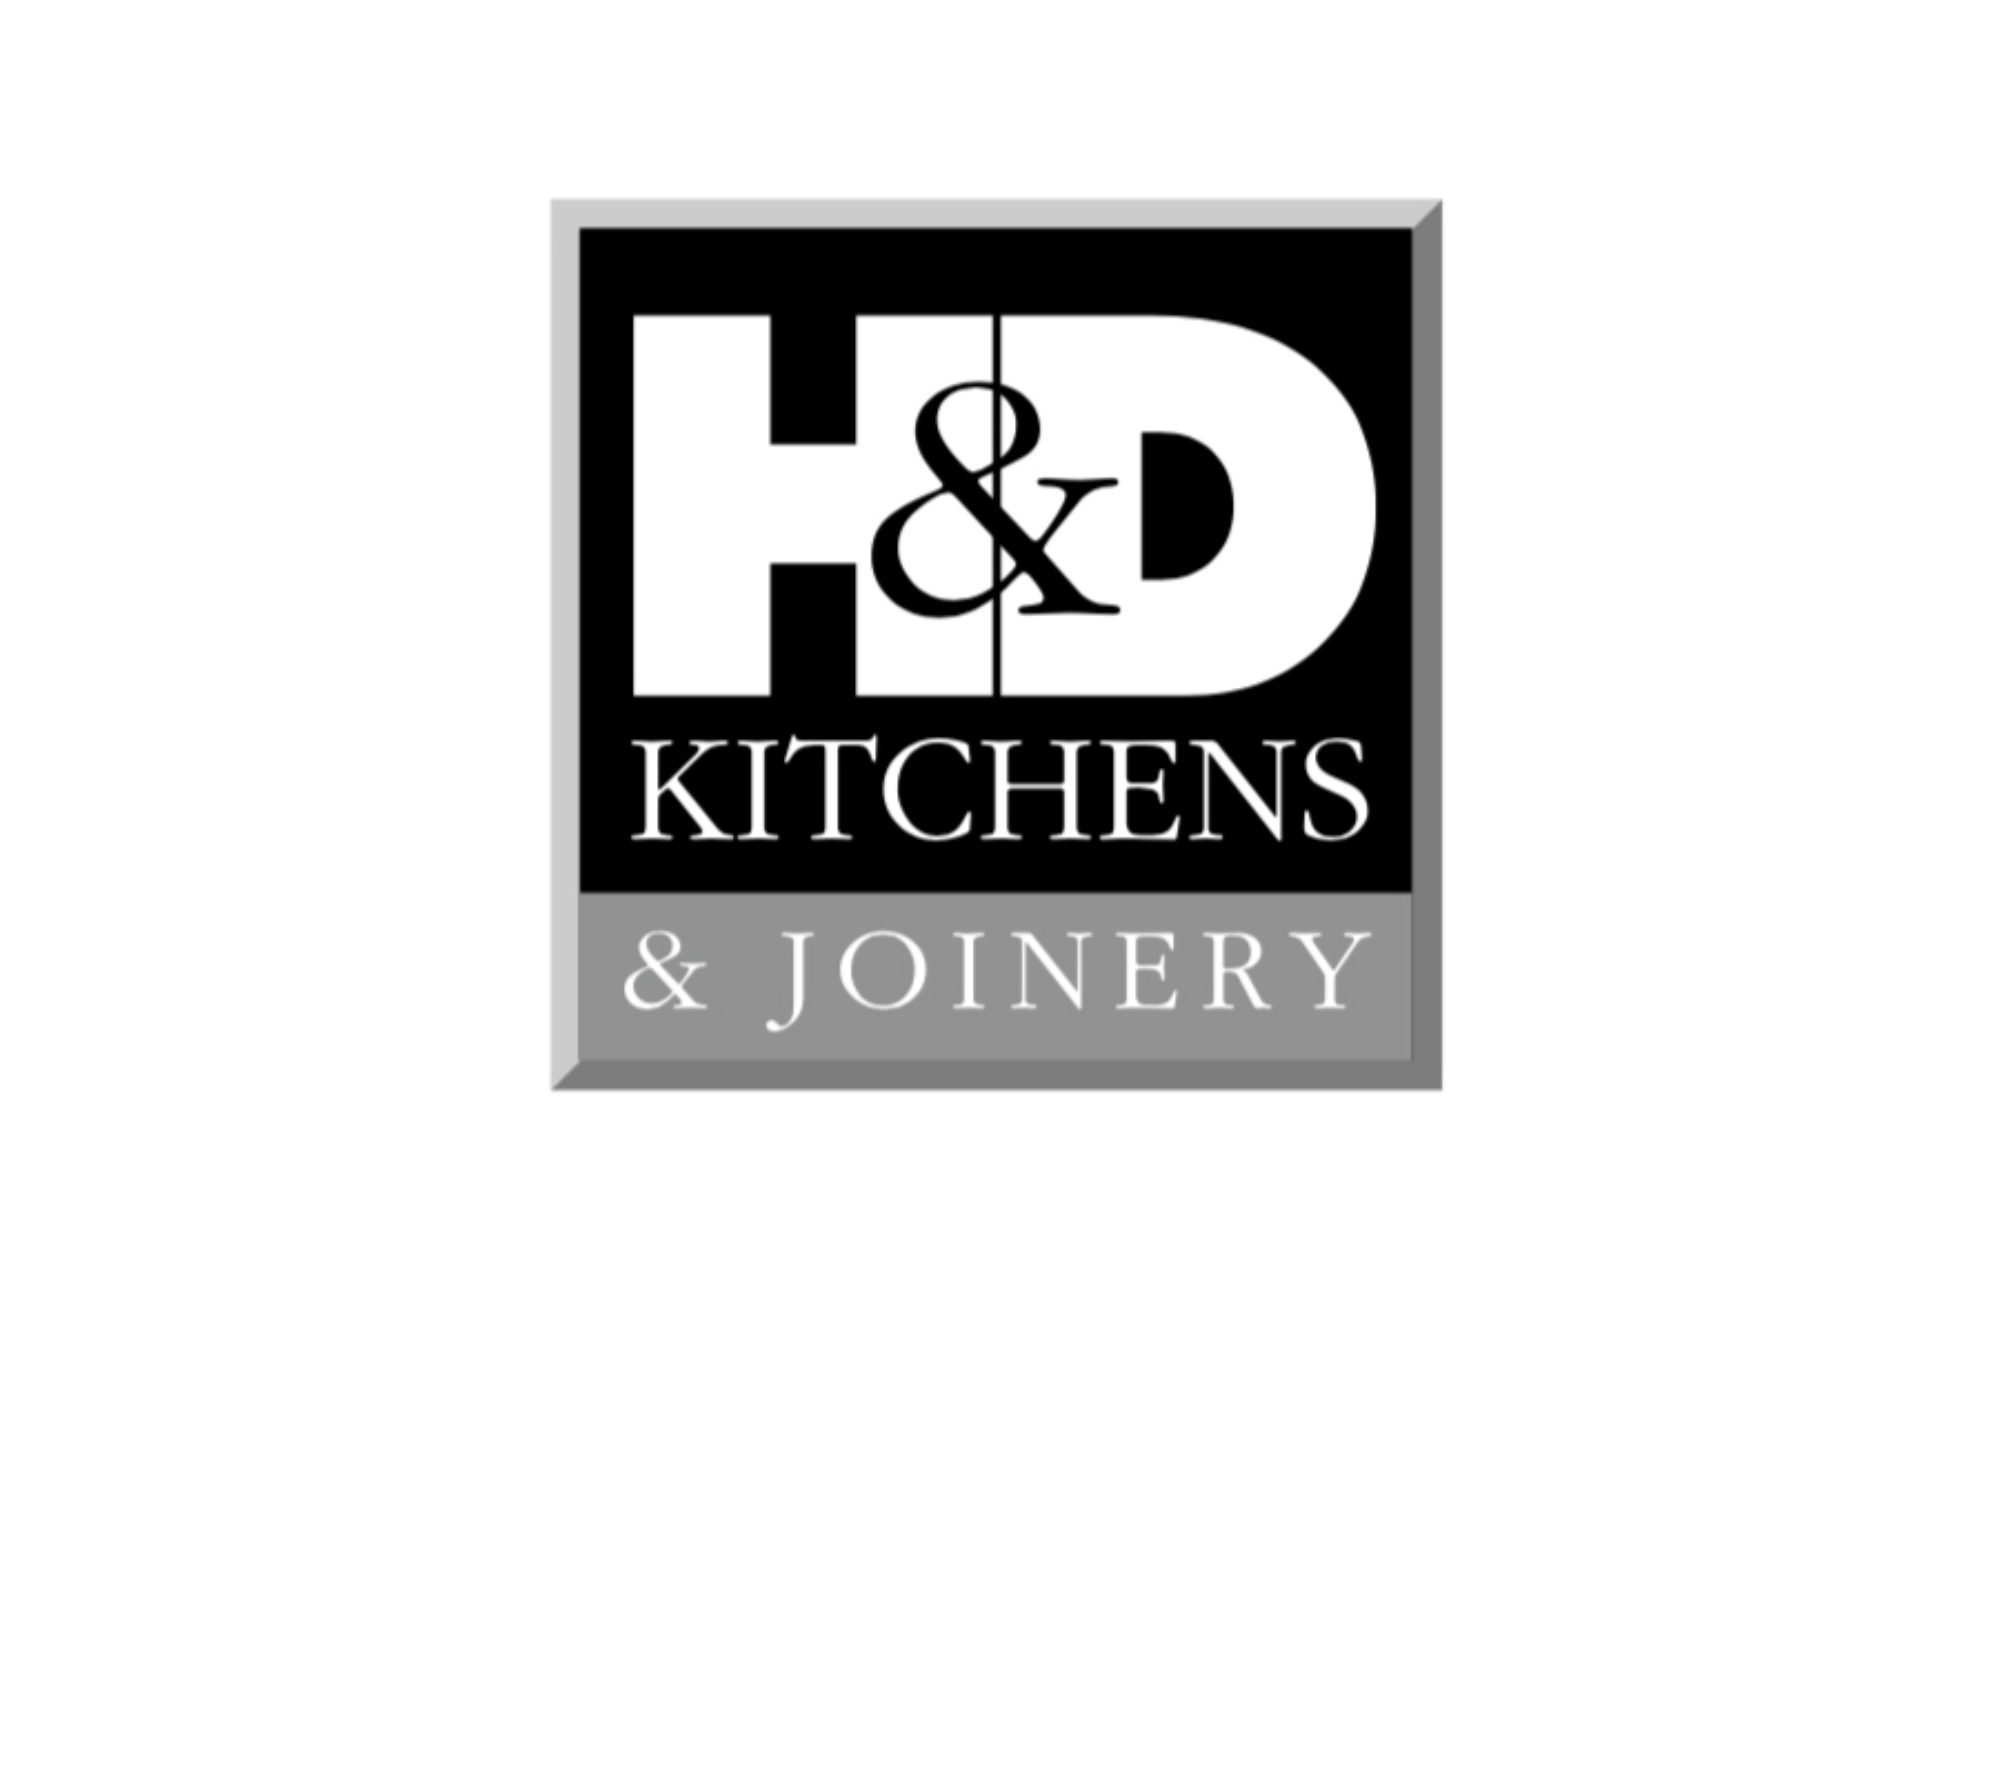 H & D Kitchens & Joinery